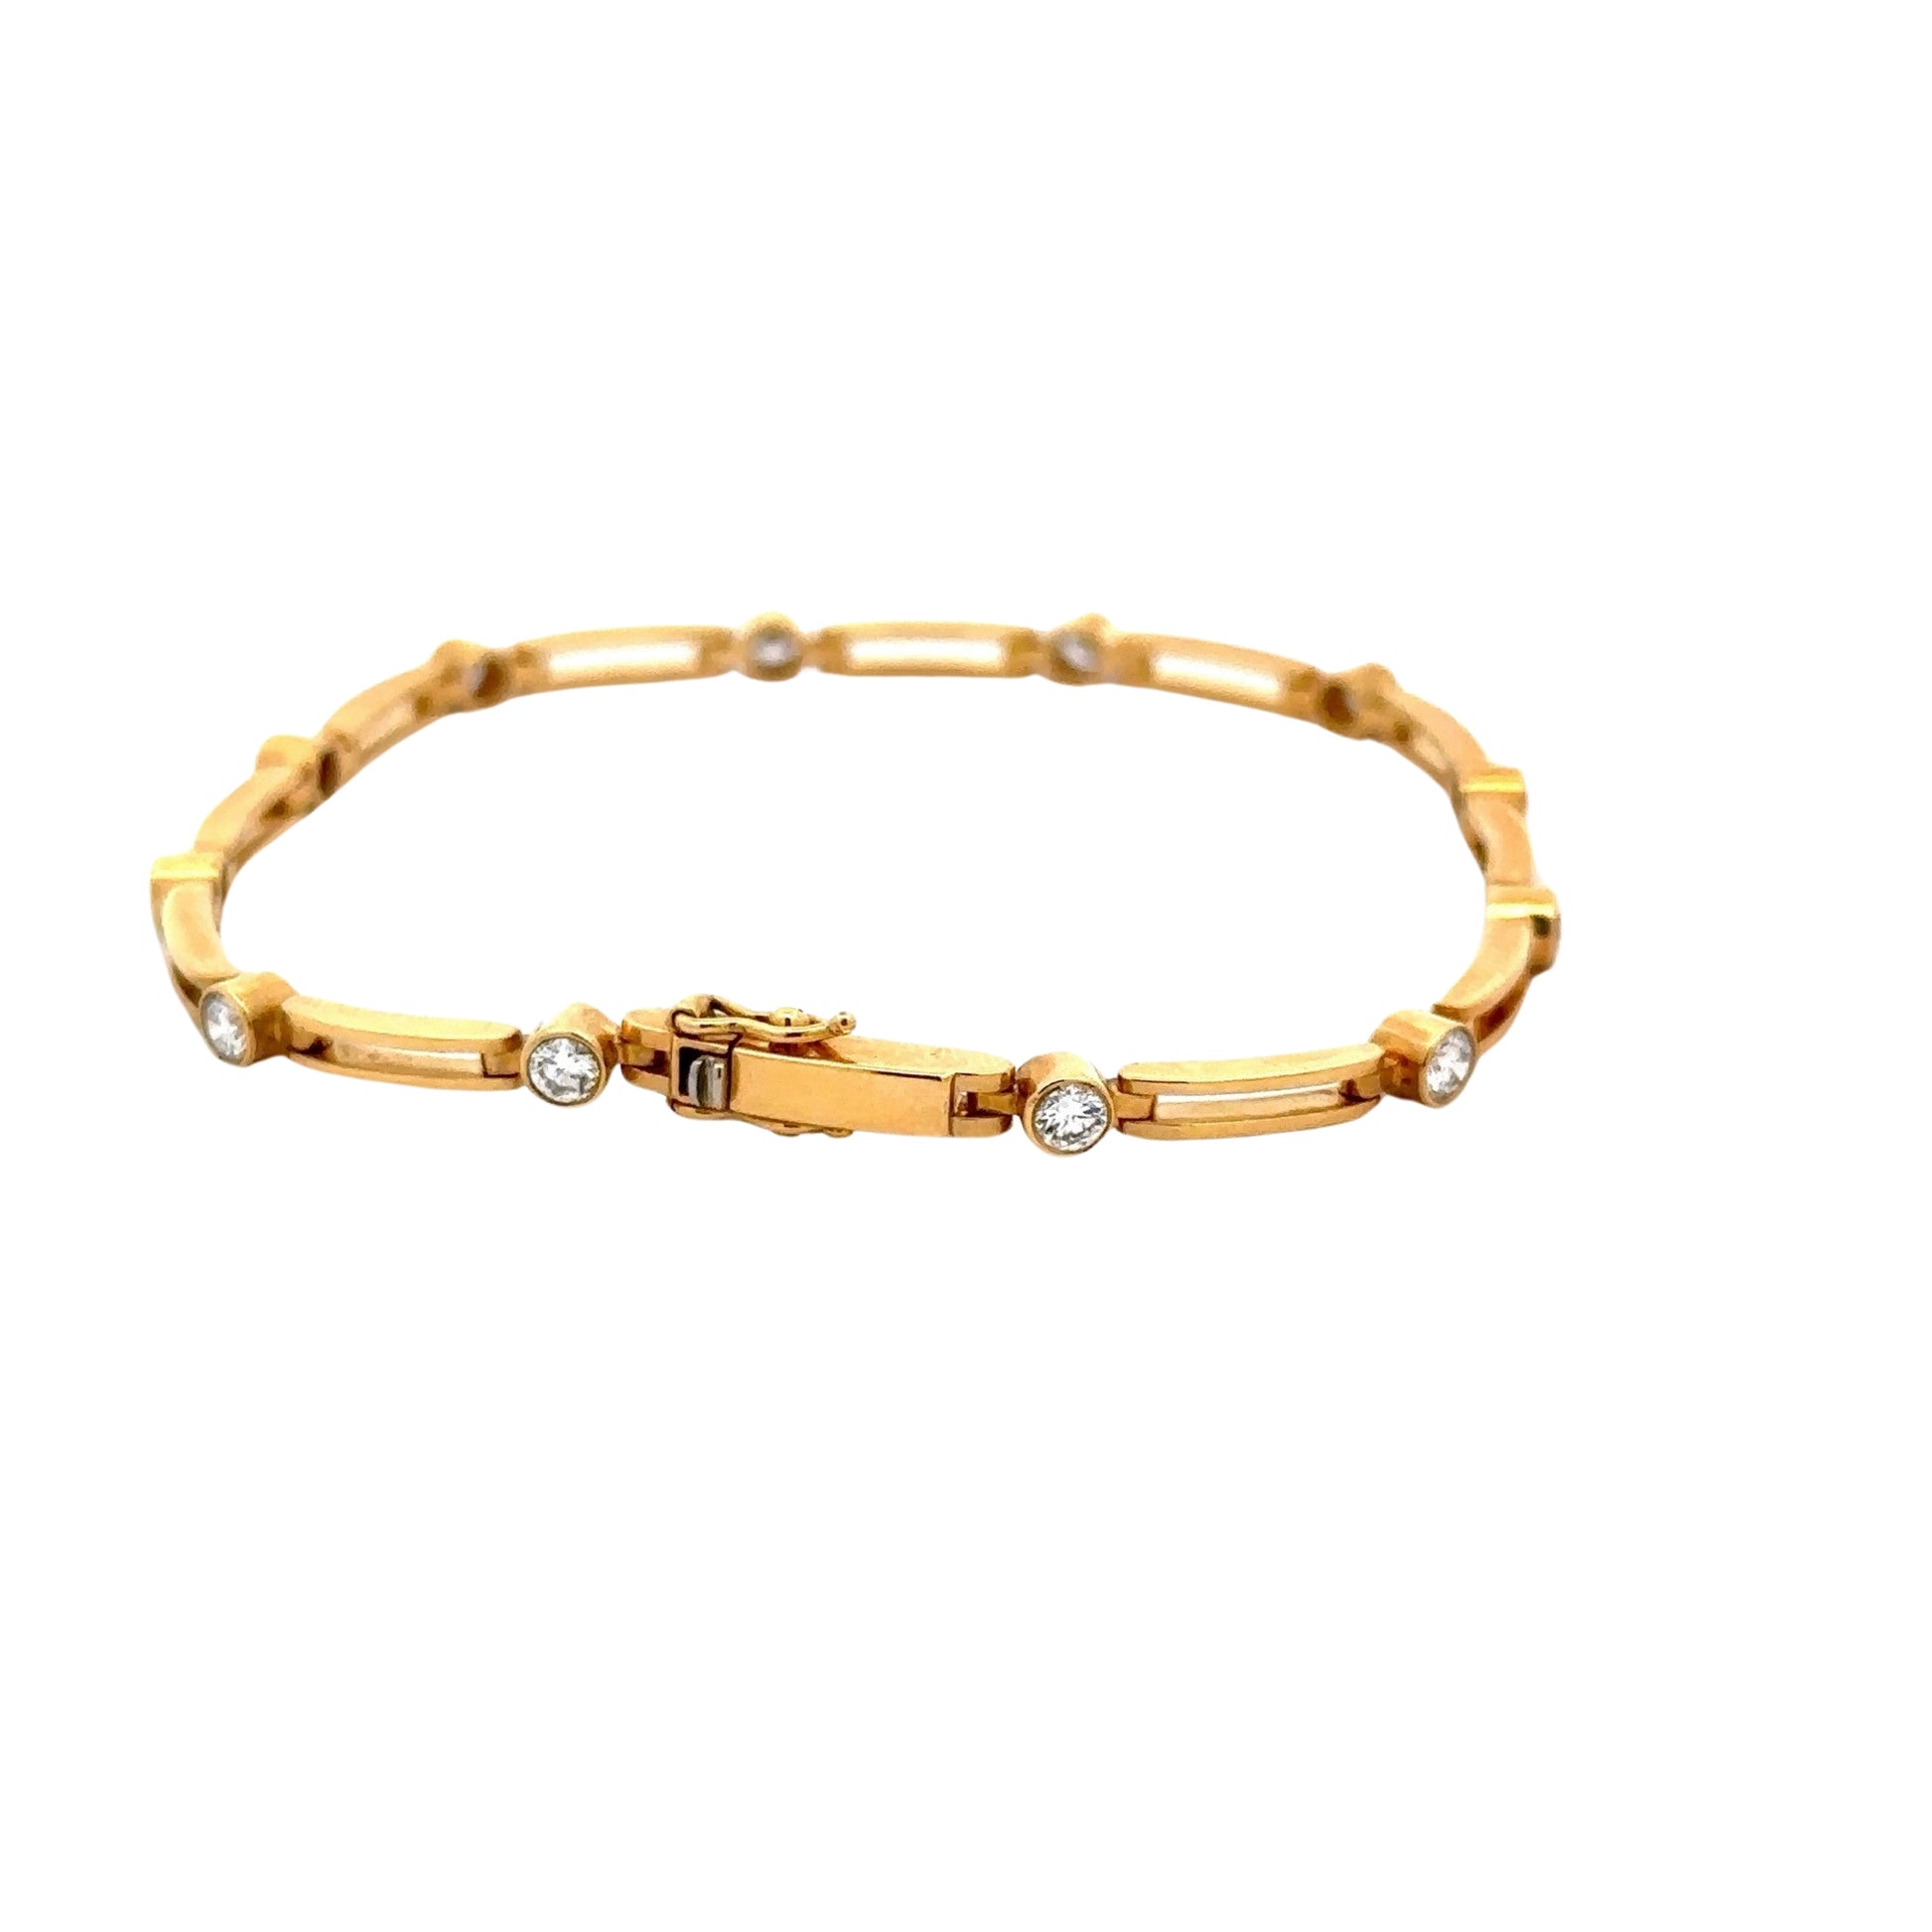 Back of 18k yellow gold bracelet with clasp and double locks